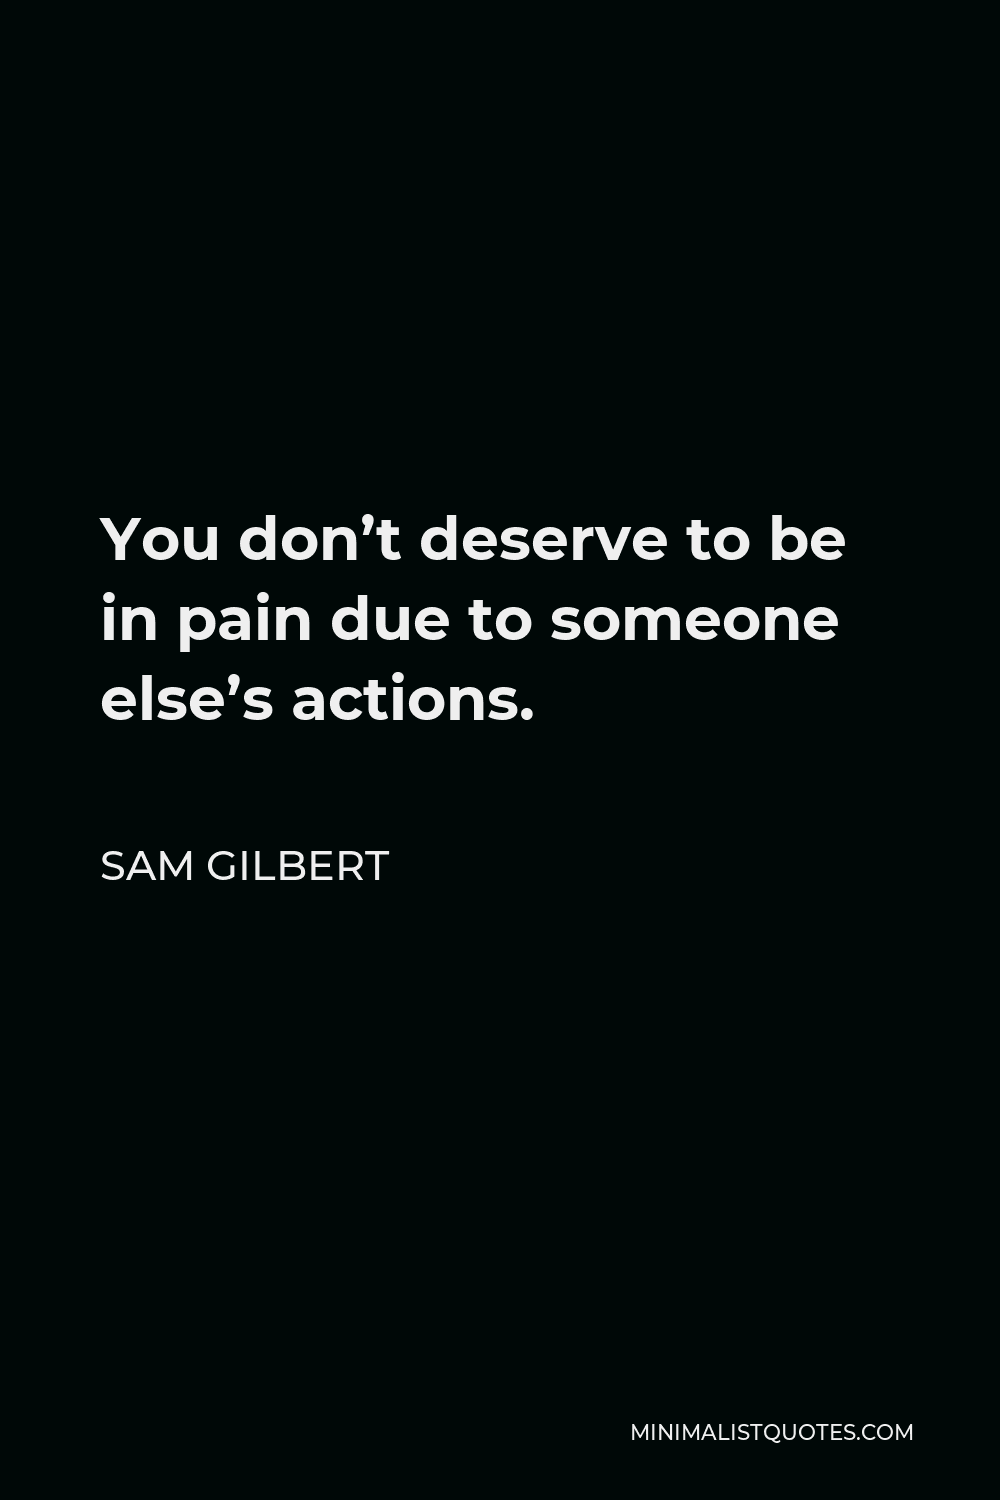 Sam Gilbert Quote - You don’t deserve to be in pain due to someone else’s actions.